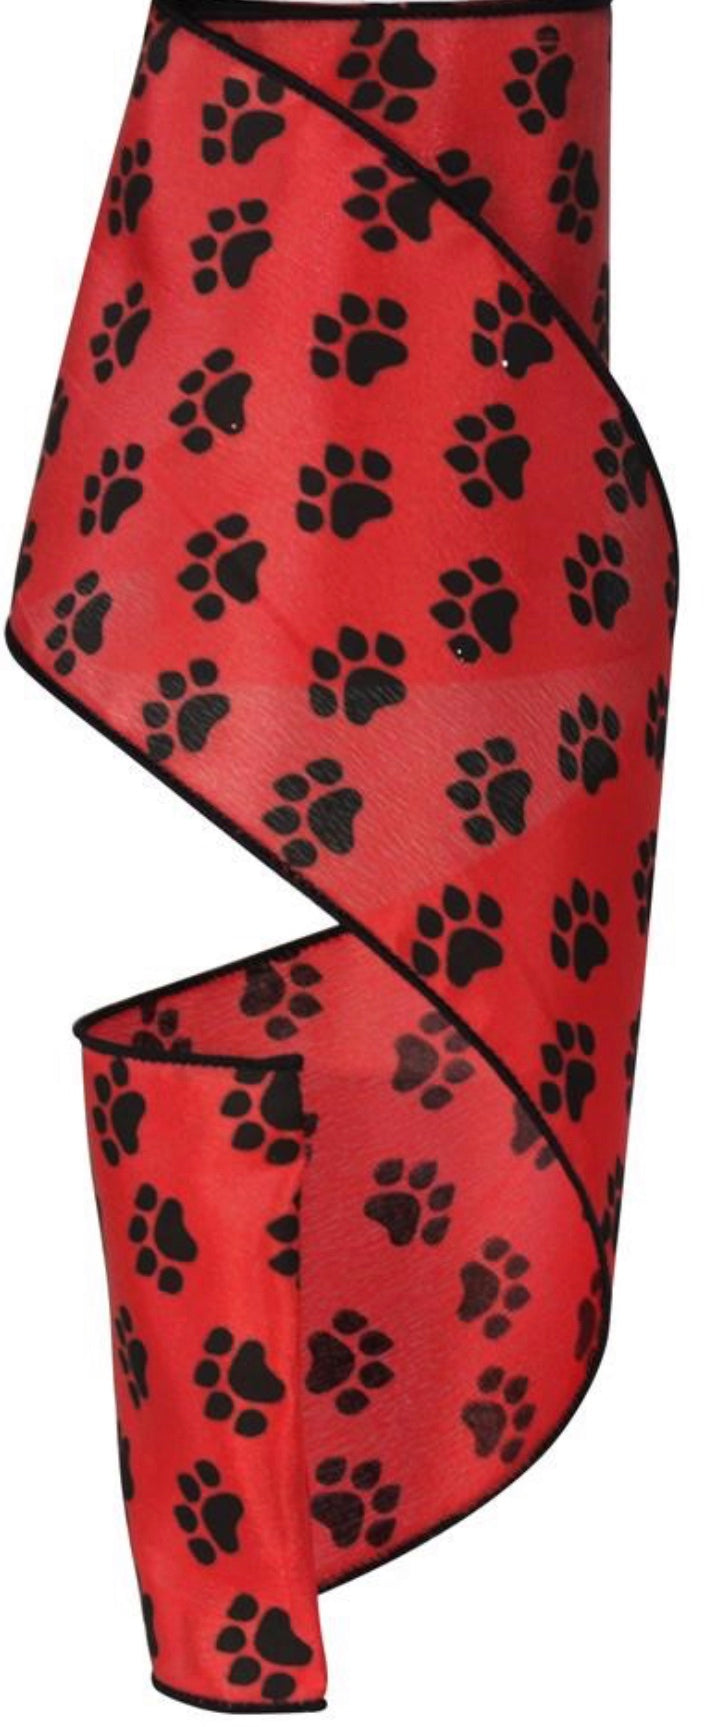 10 Yards - 4” Wired Red and Black Satin Paw Print Dog Ribbon